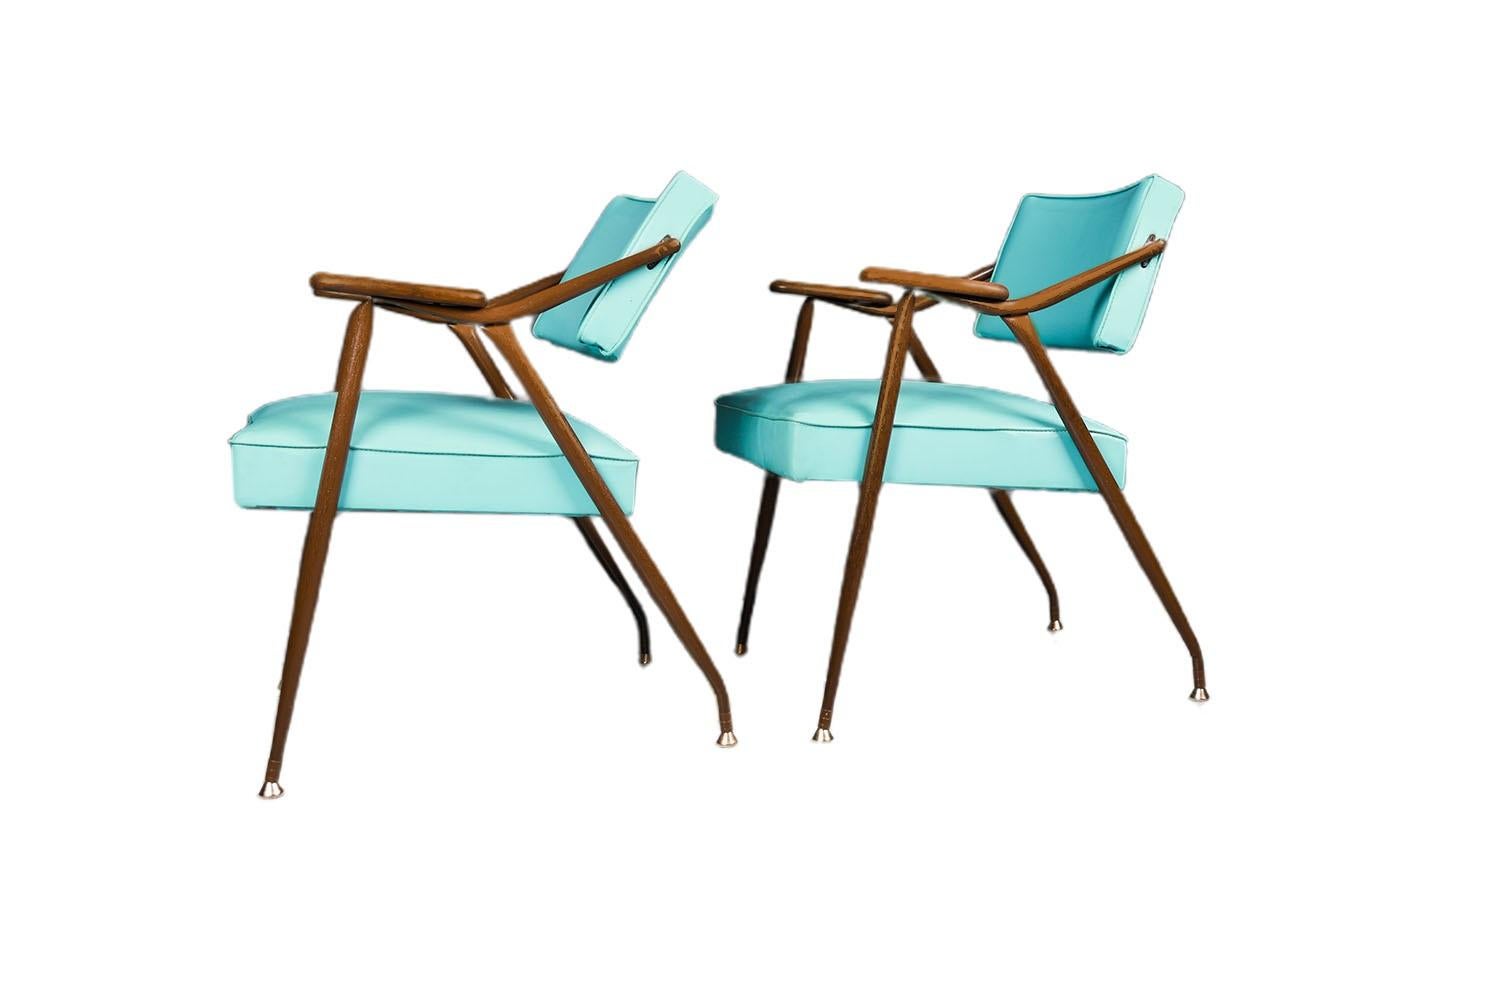 A gorgeous matching pair of lounge chairs by Viko Baumritter, USA, circa 1959. These Mid-Century armchairs have the lean of a lounge chair and the poise to draw attention. The dynamic sheen of the blue vinyl upholstery has an undeniable retro